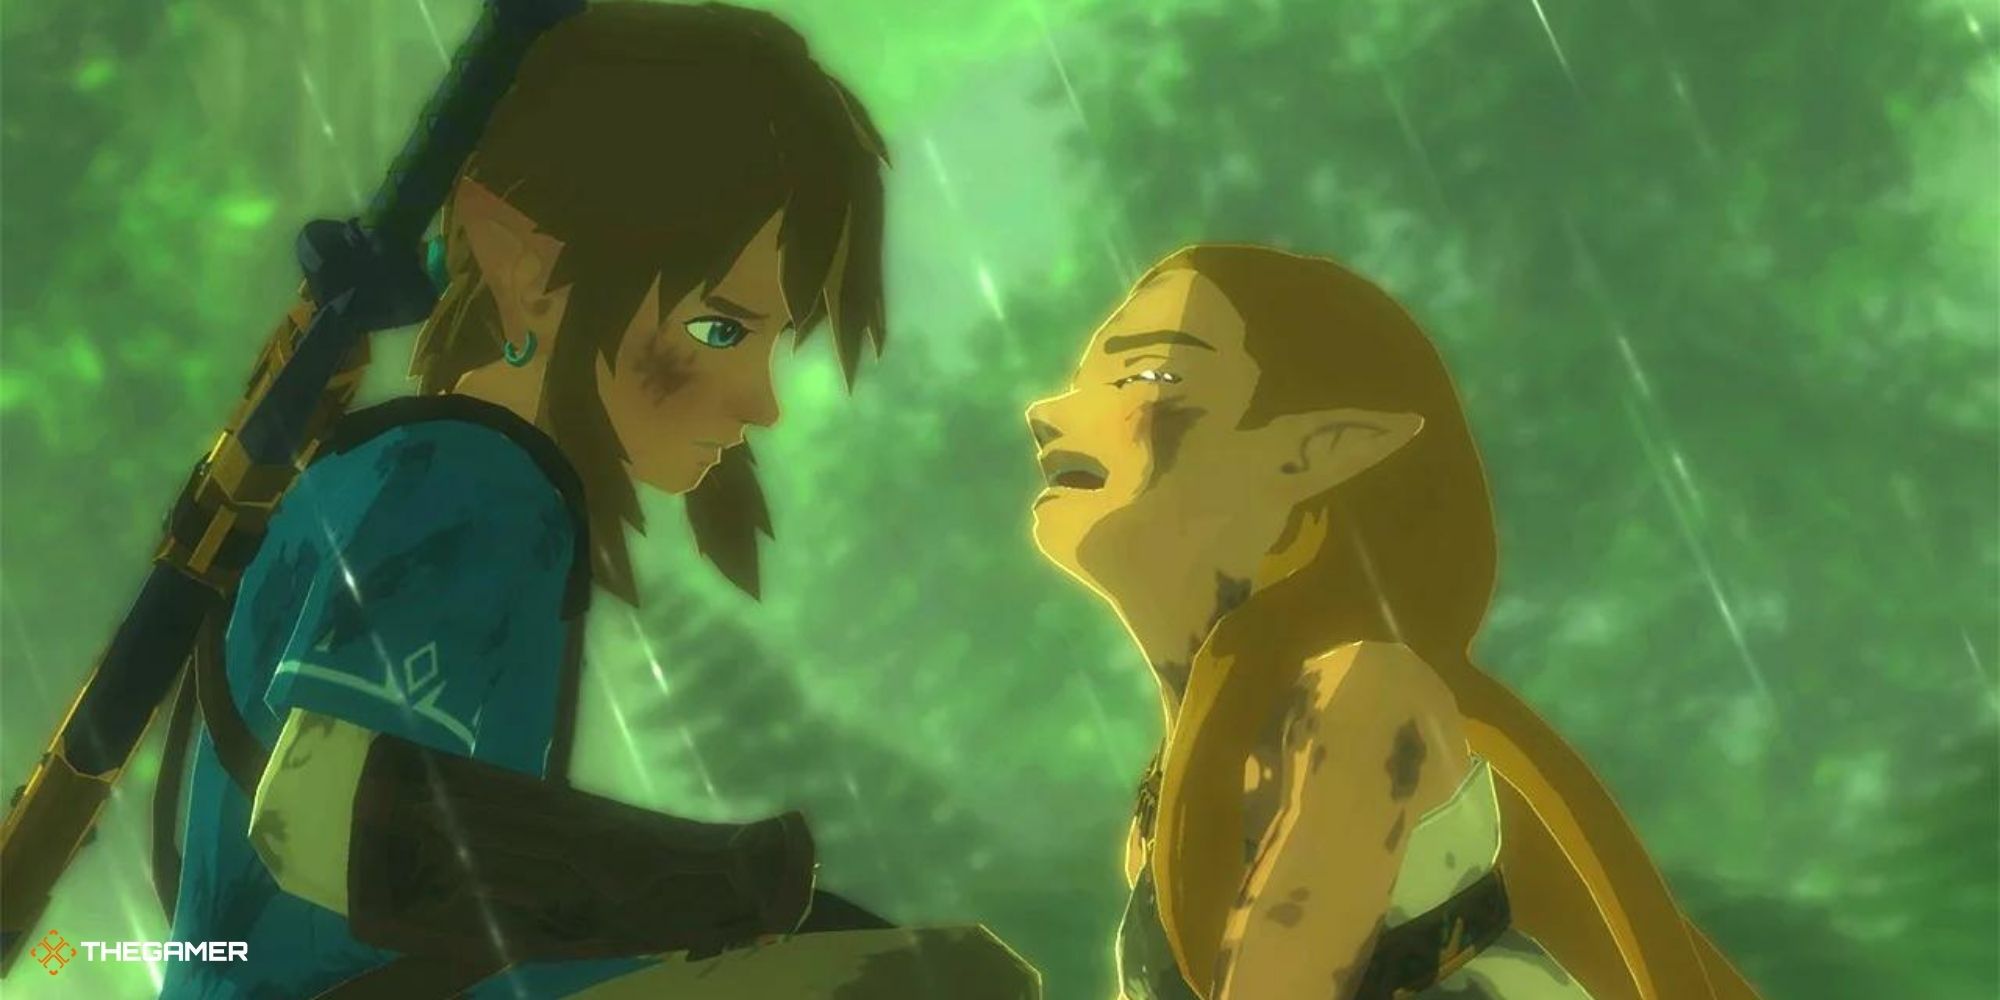 Breath of the Wild - Link and Zelda crying in the rain